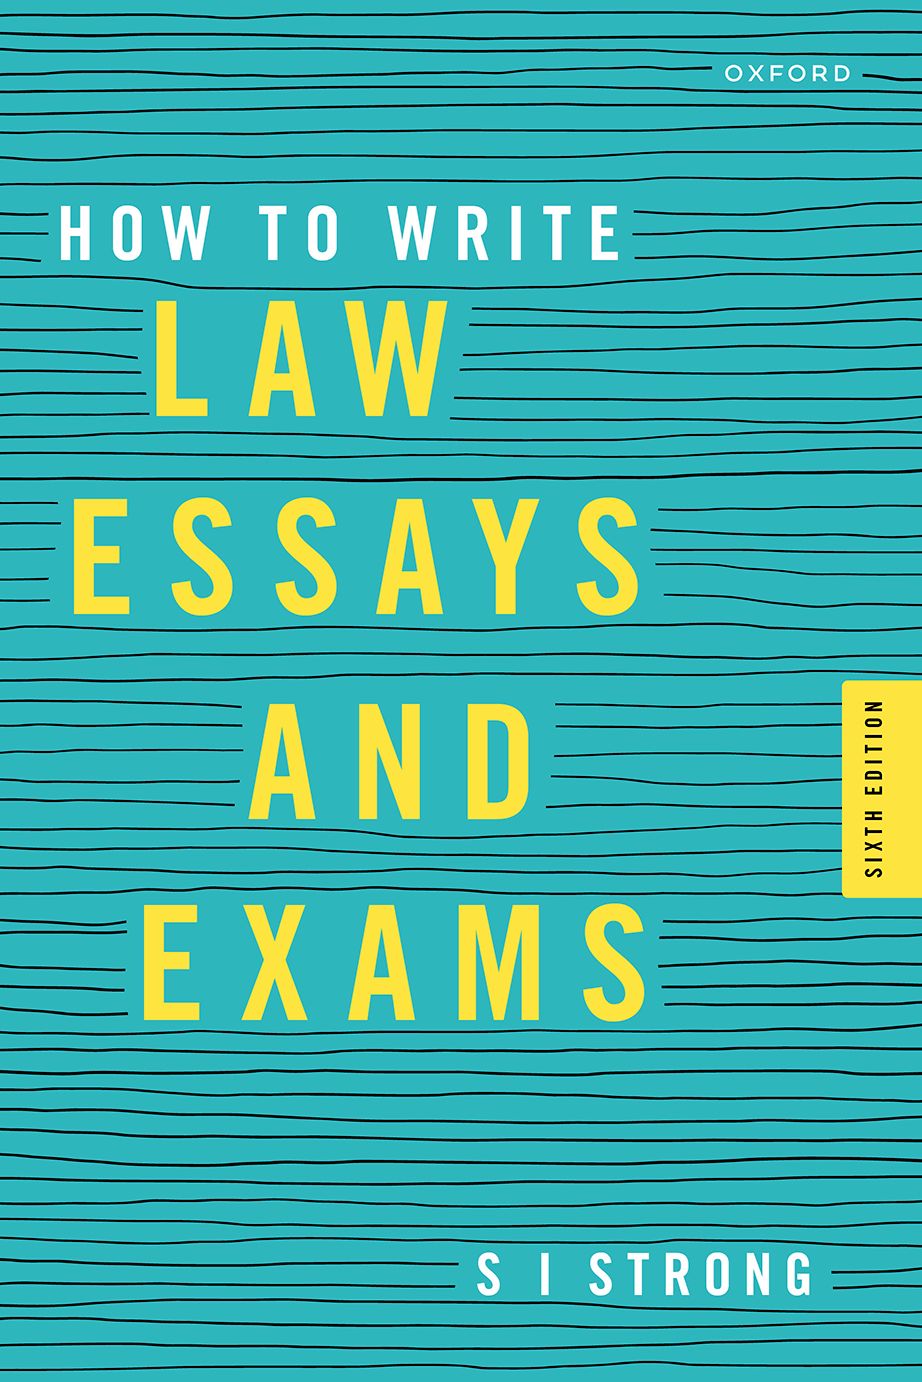 so strong how to write law essays